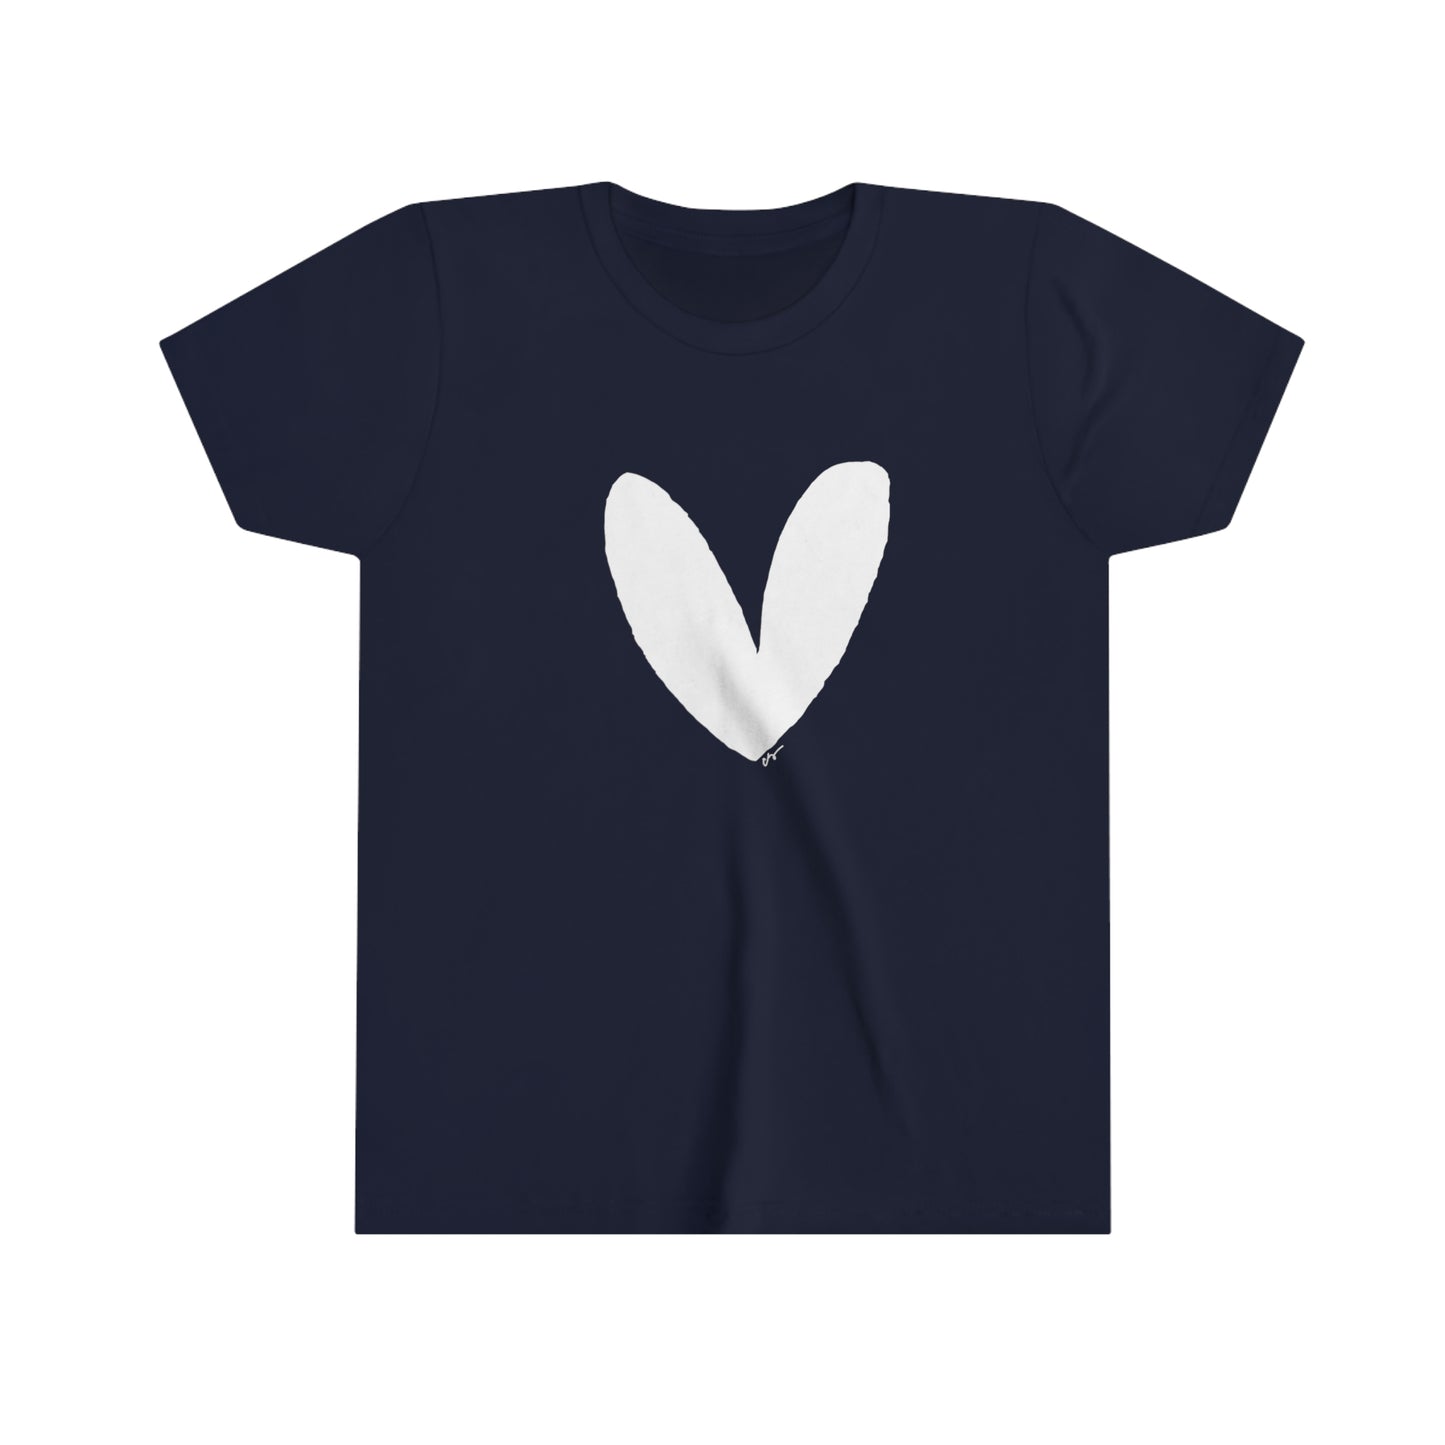 Have A Heart Kids Tee (White Heart)